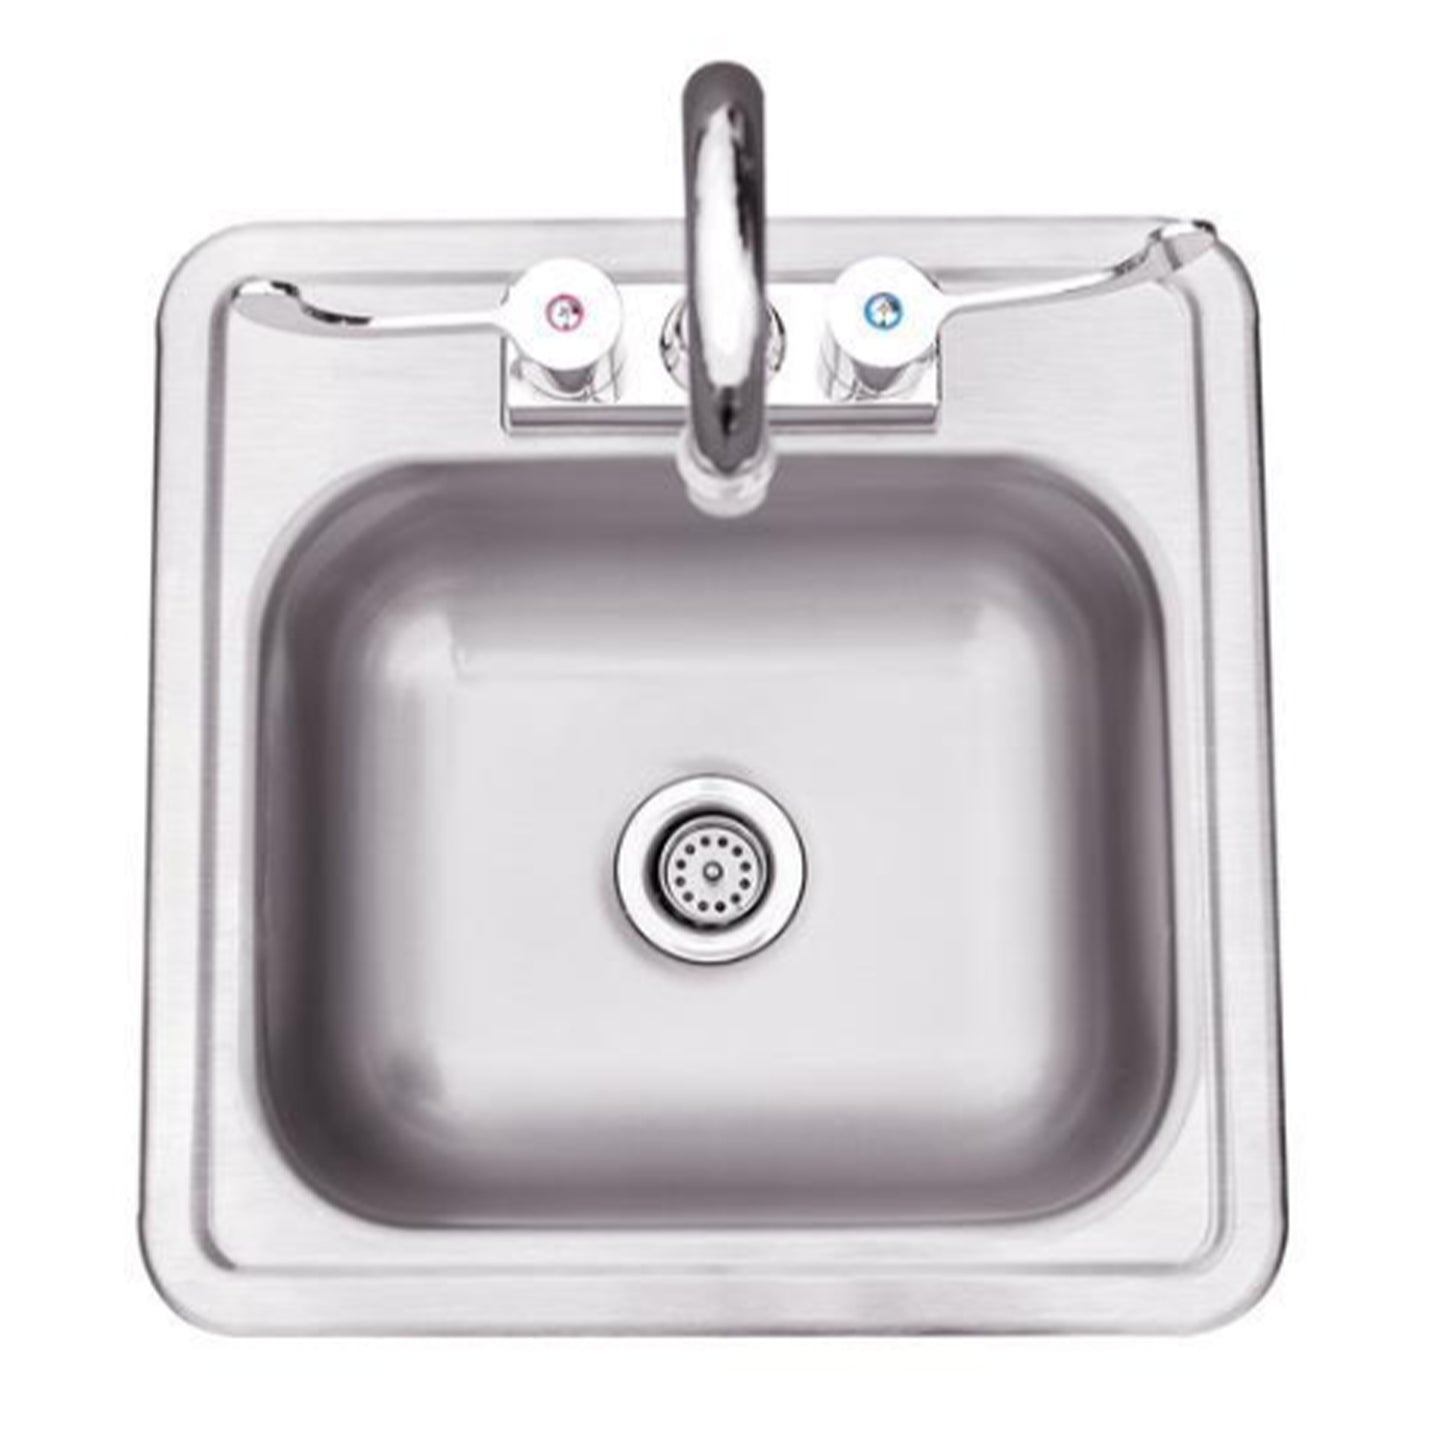 Summerset 15-Inch Stainless Steel Drop-in Sink & Hot/Cold Faucet